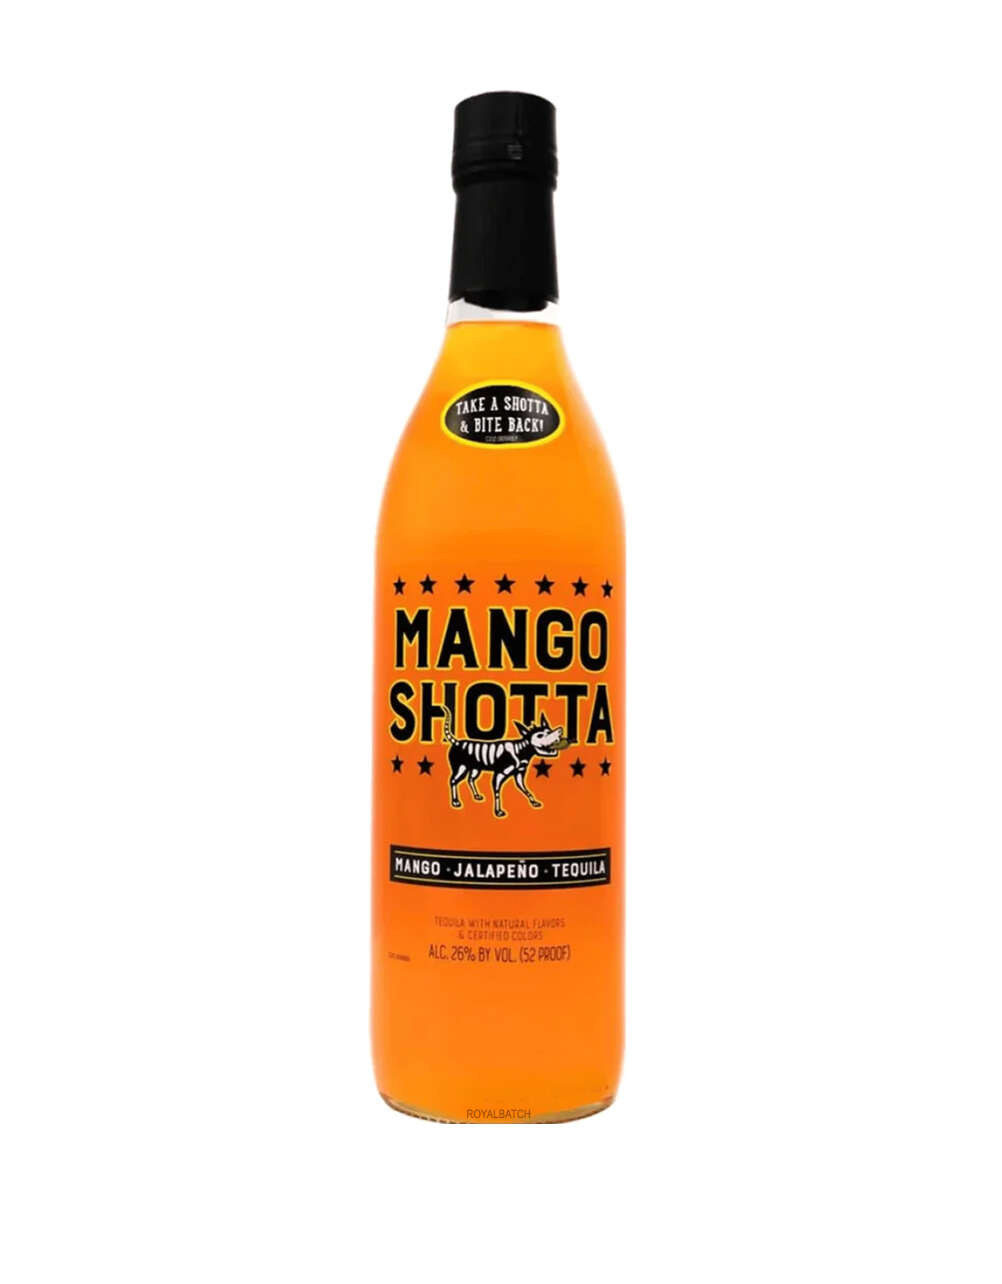 Mango Shotta Spicy Mango and Jalapeno Flavored Tequila